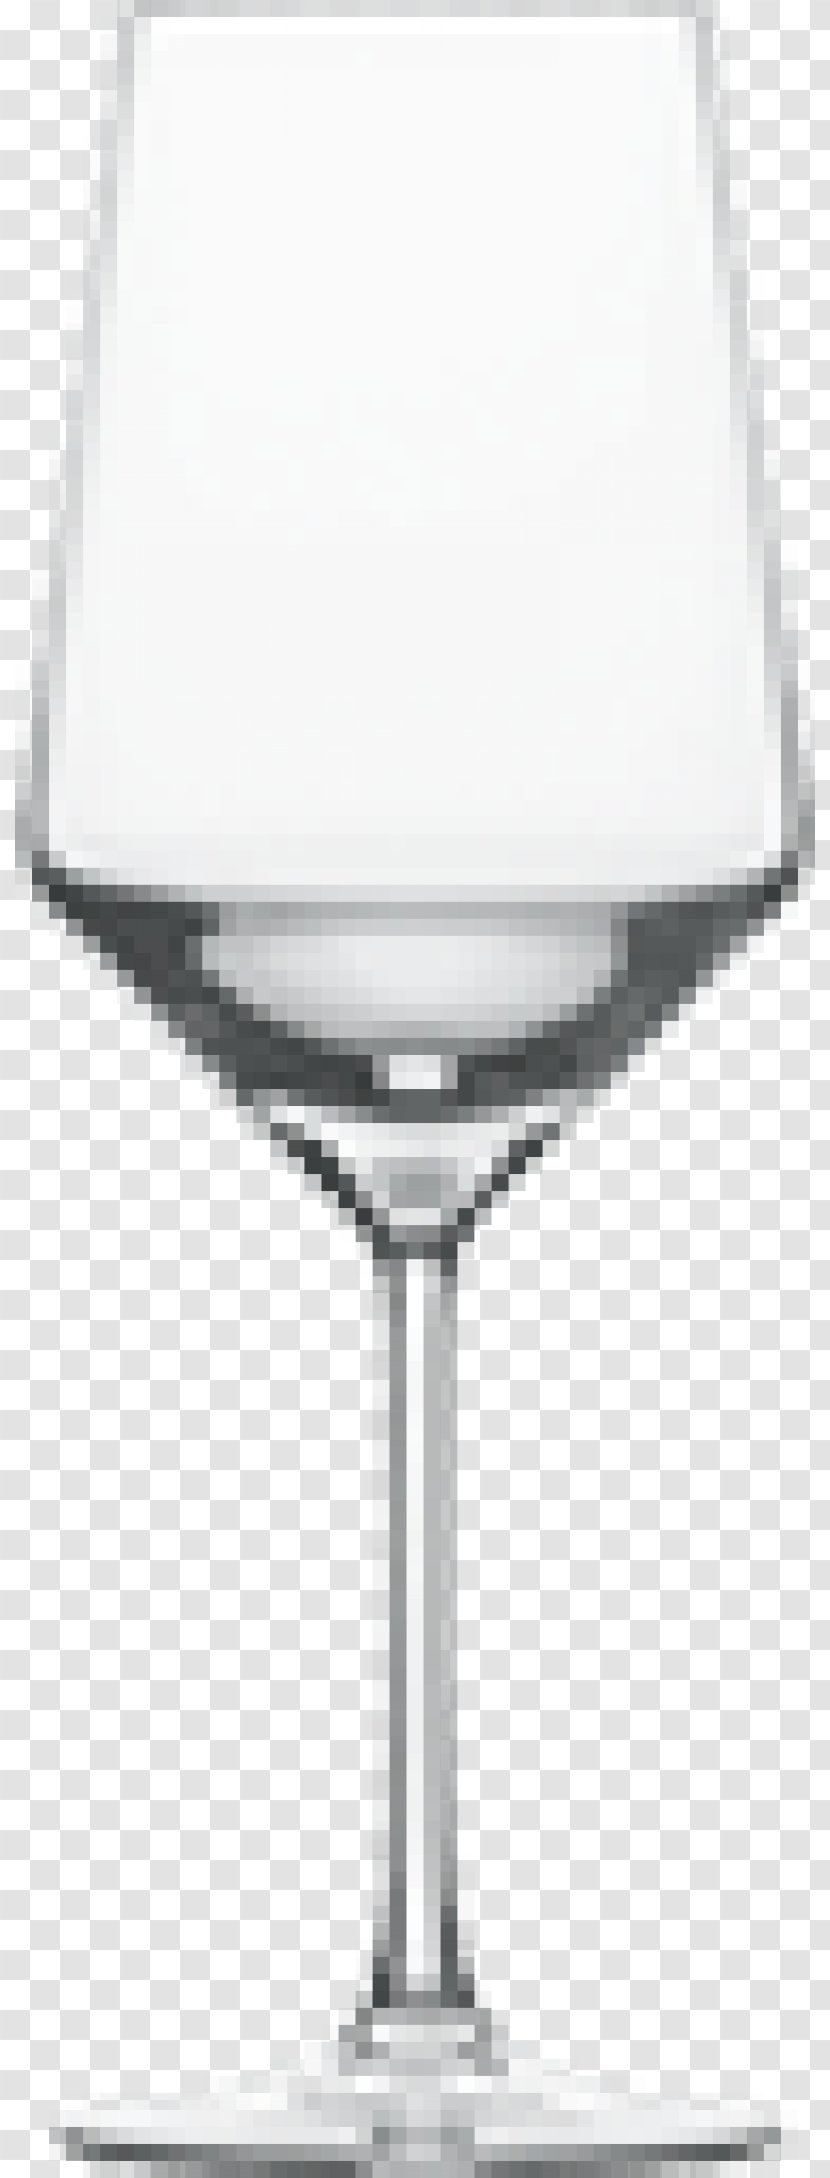 Red Wine Cabernet Sauvignon Zwiesel Glass - Measuring Transparent PNG